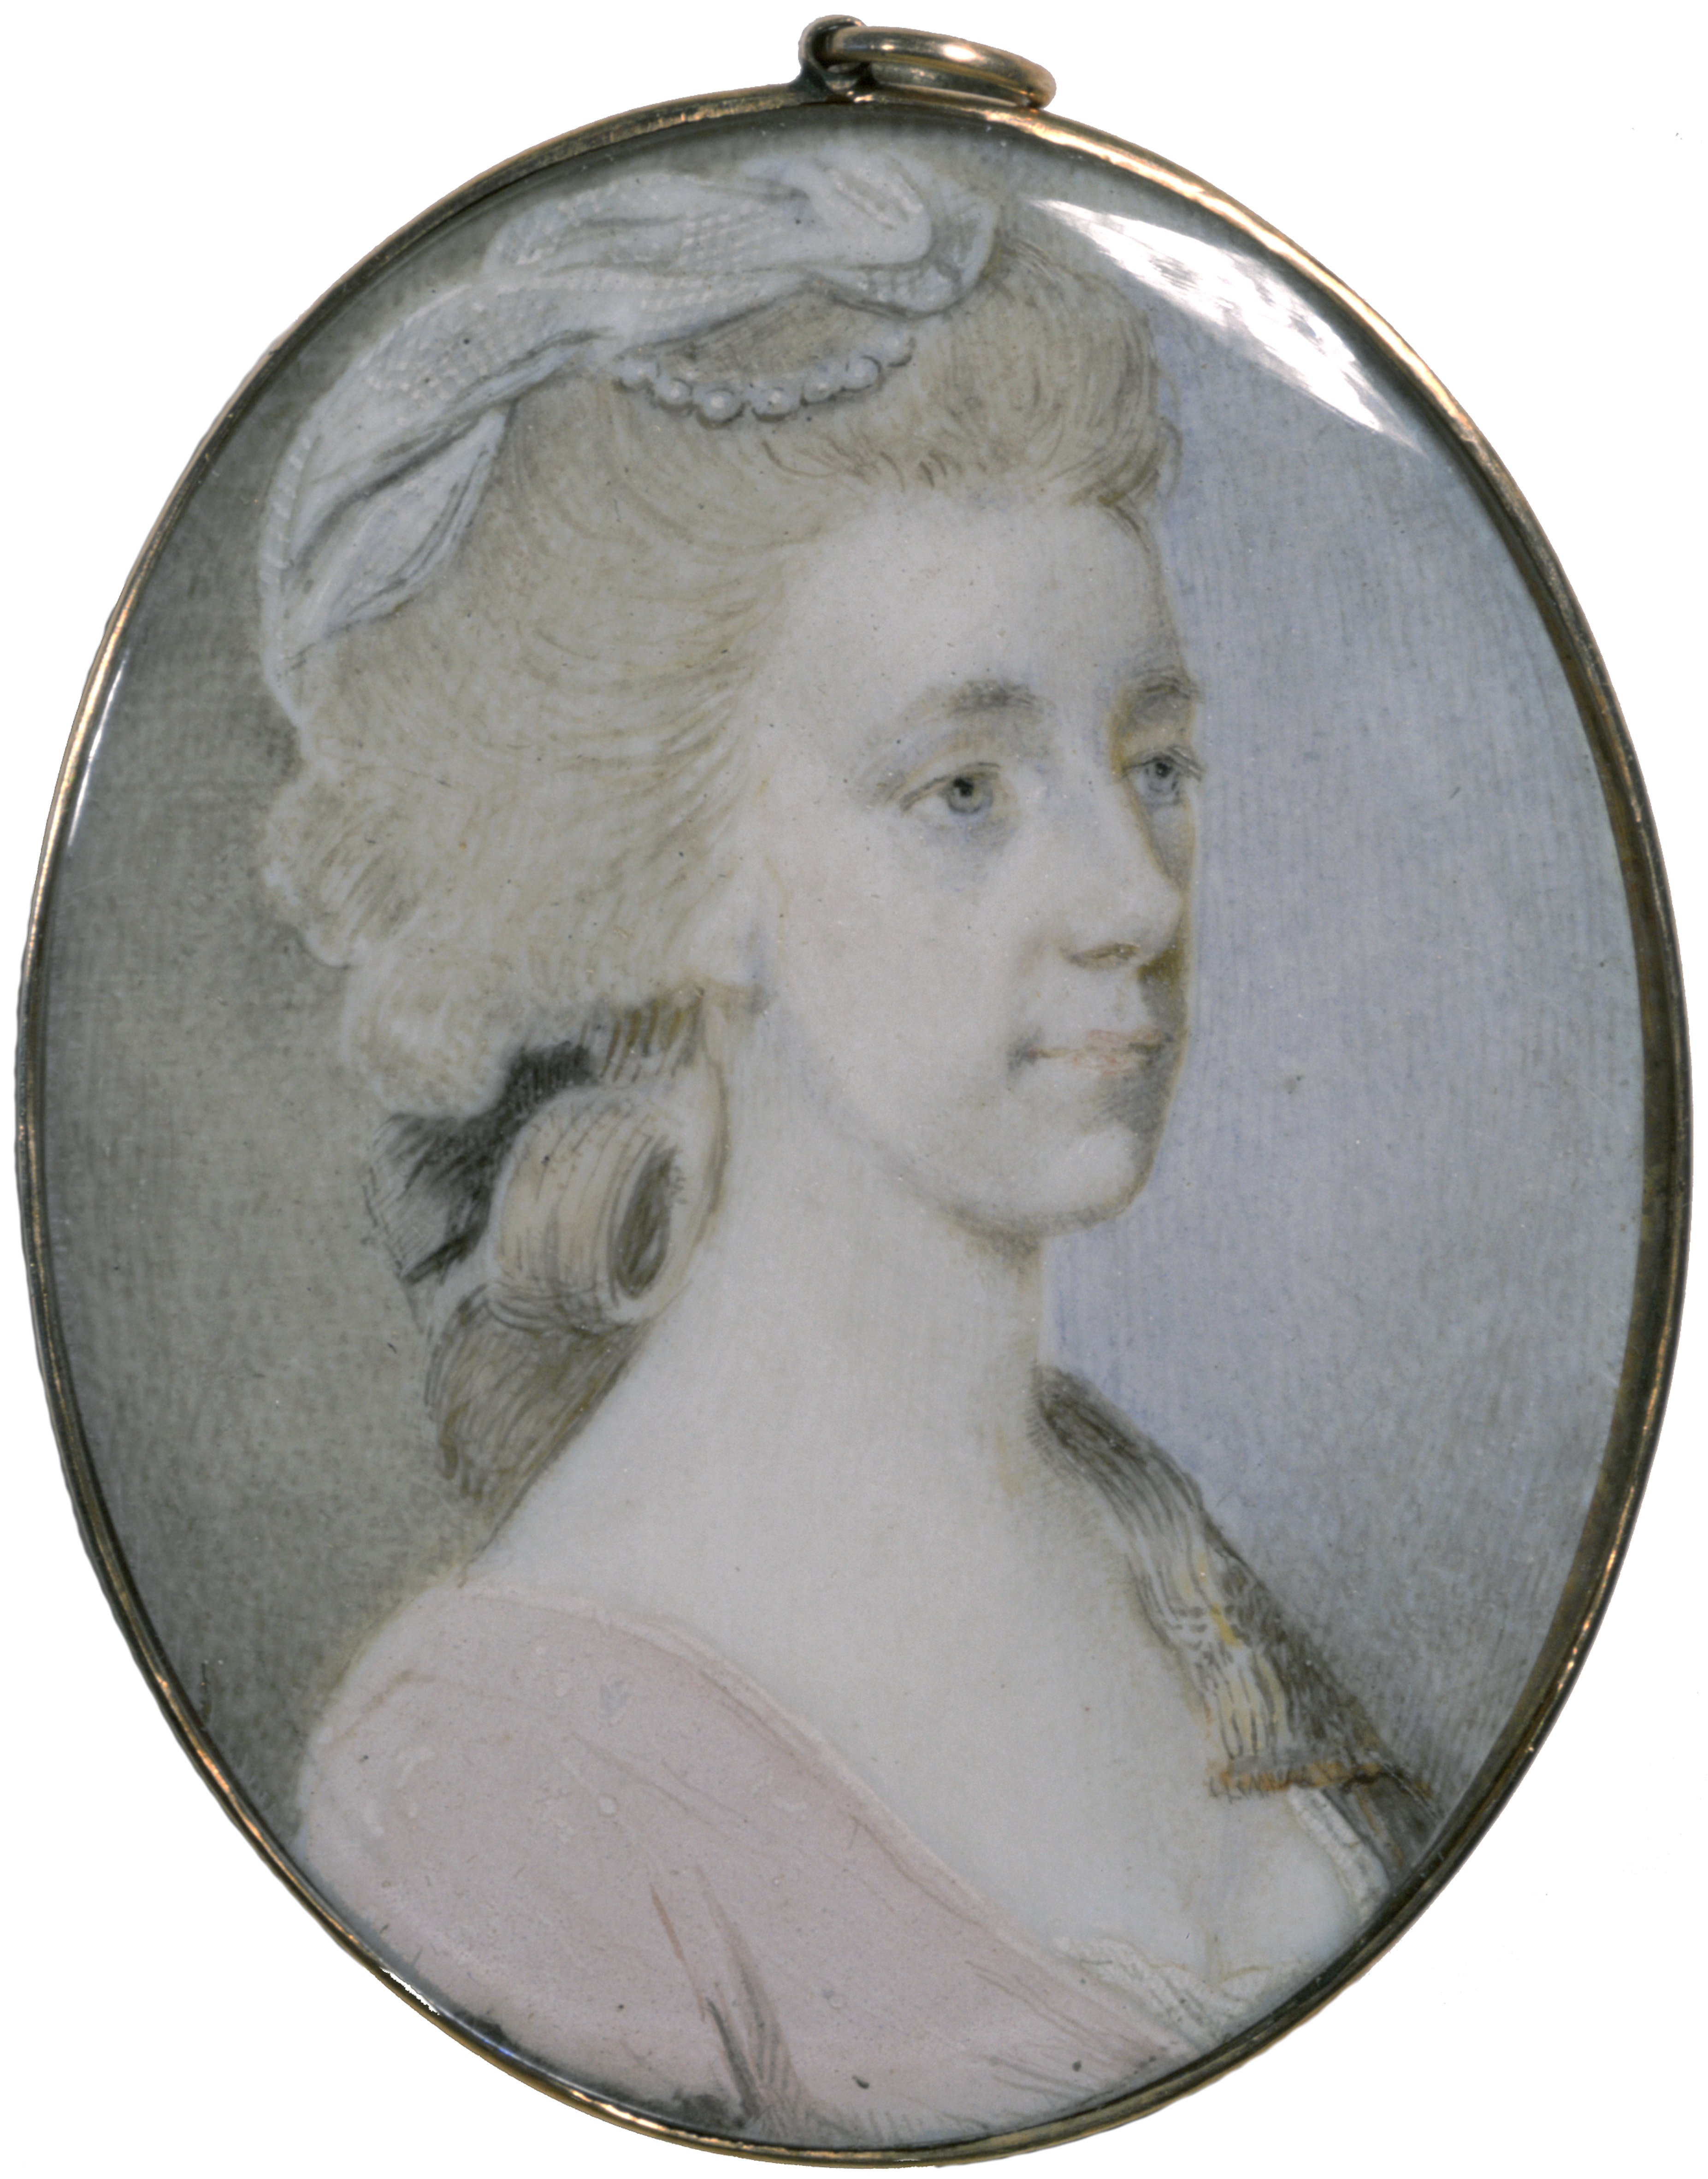 Cameo shaped miniature portrait of a woman with 18th century style bouffed up blonde hair topped with a white hair decoration in which there is a string of pearls. She wears a low pink dress